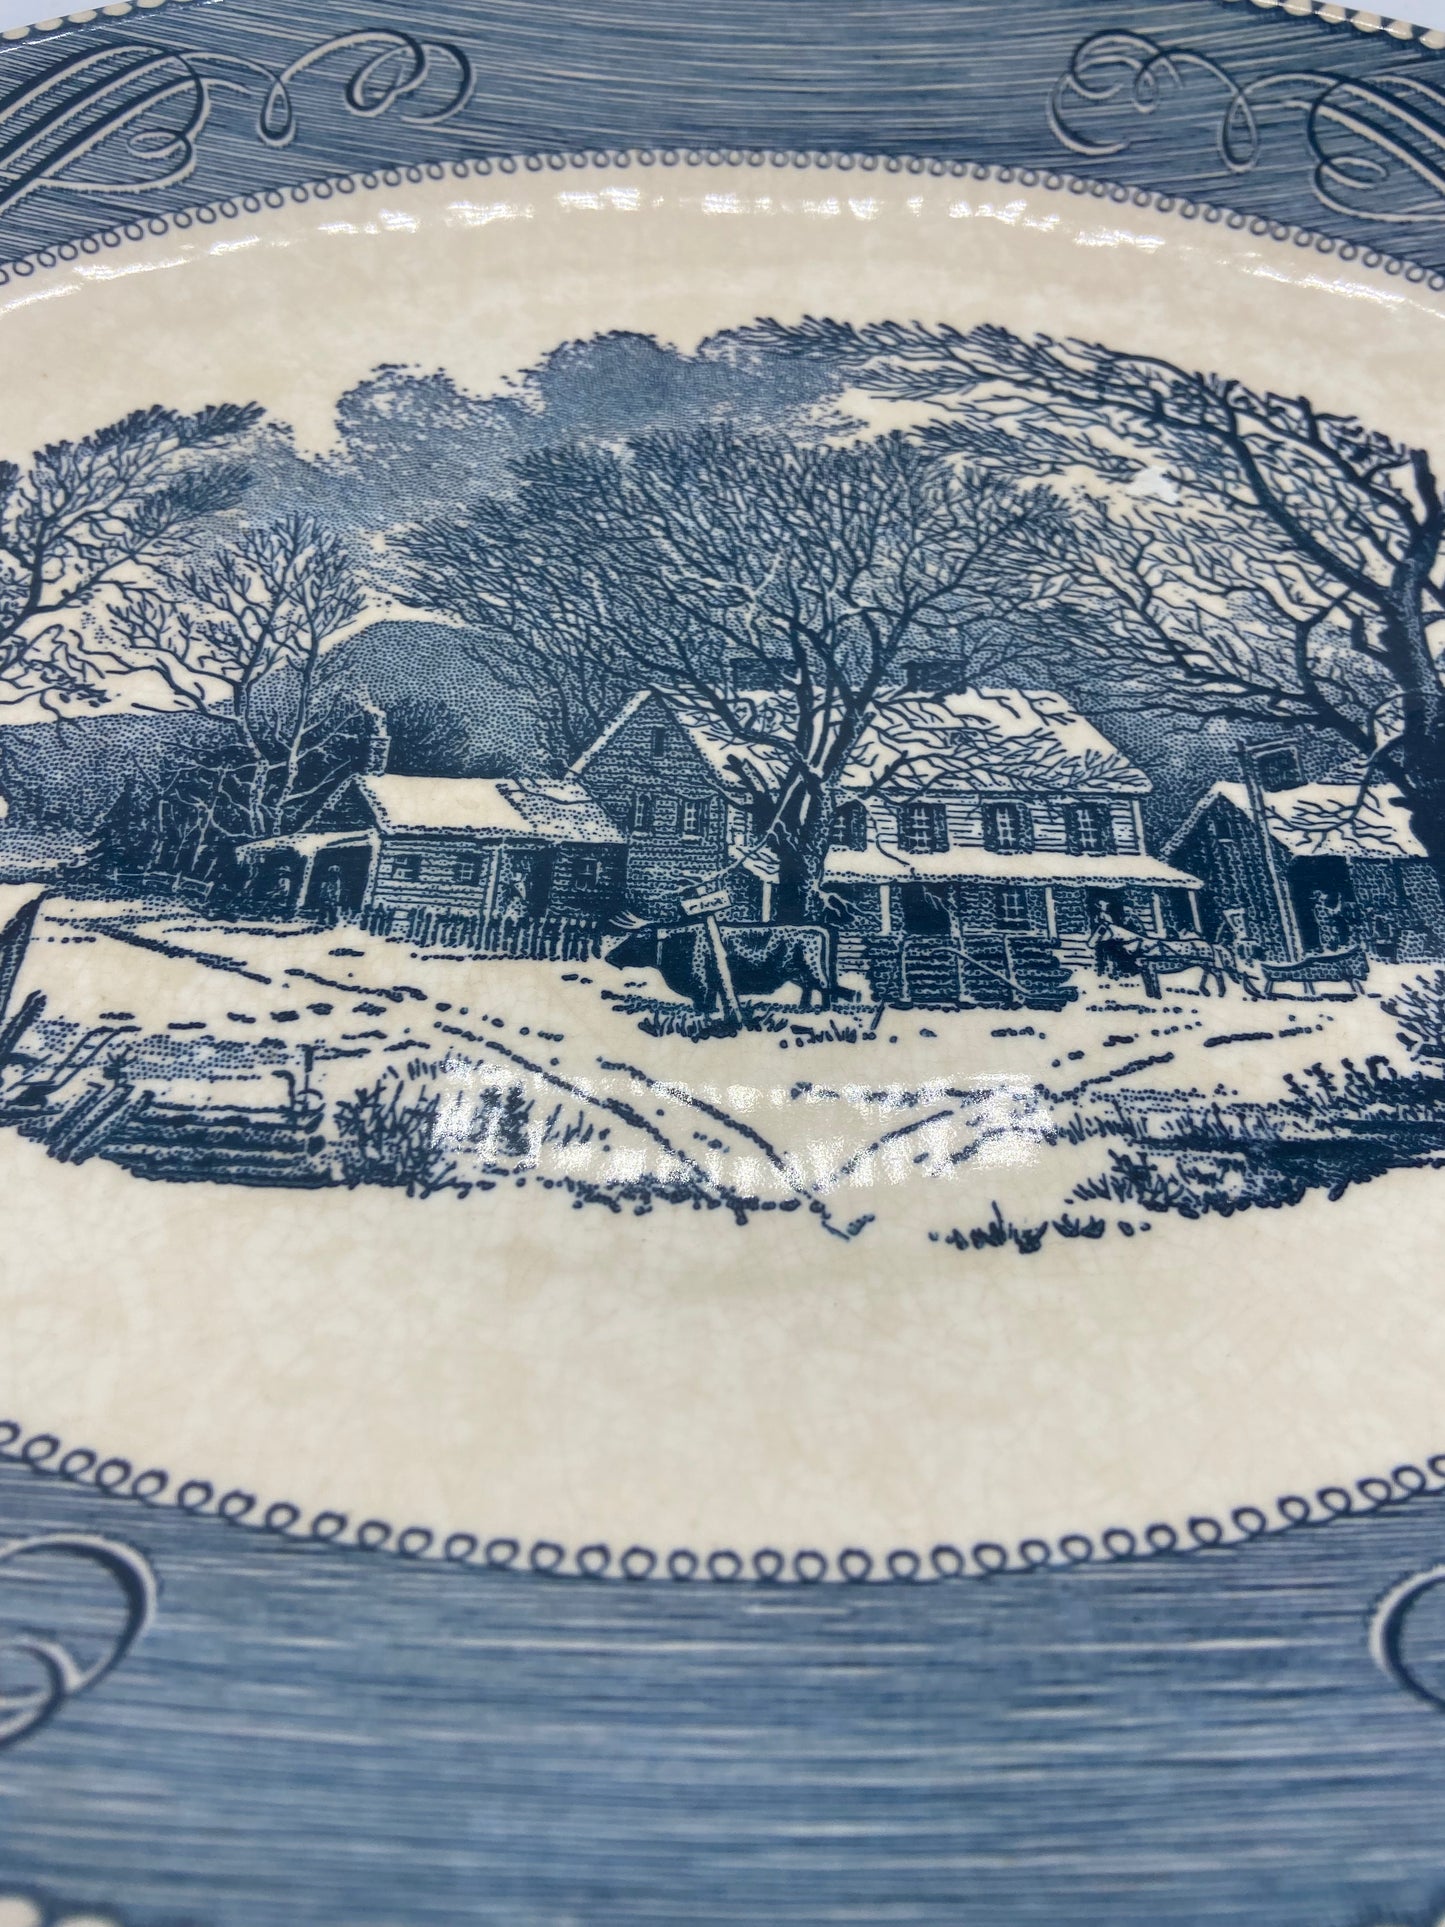 Currier and Ives Blue Oval Serving Platter by Royal